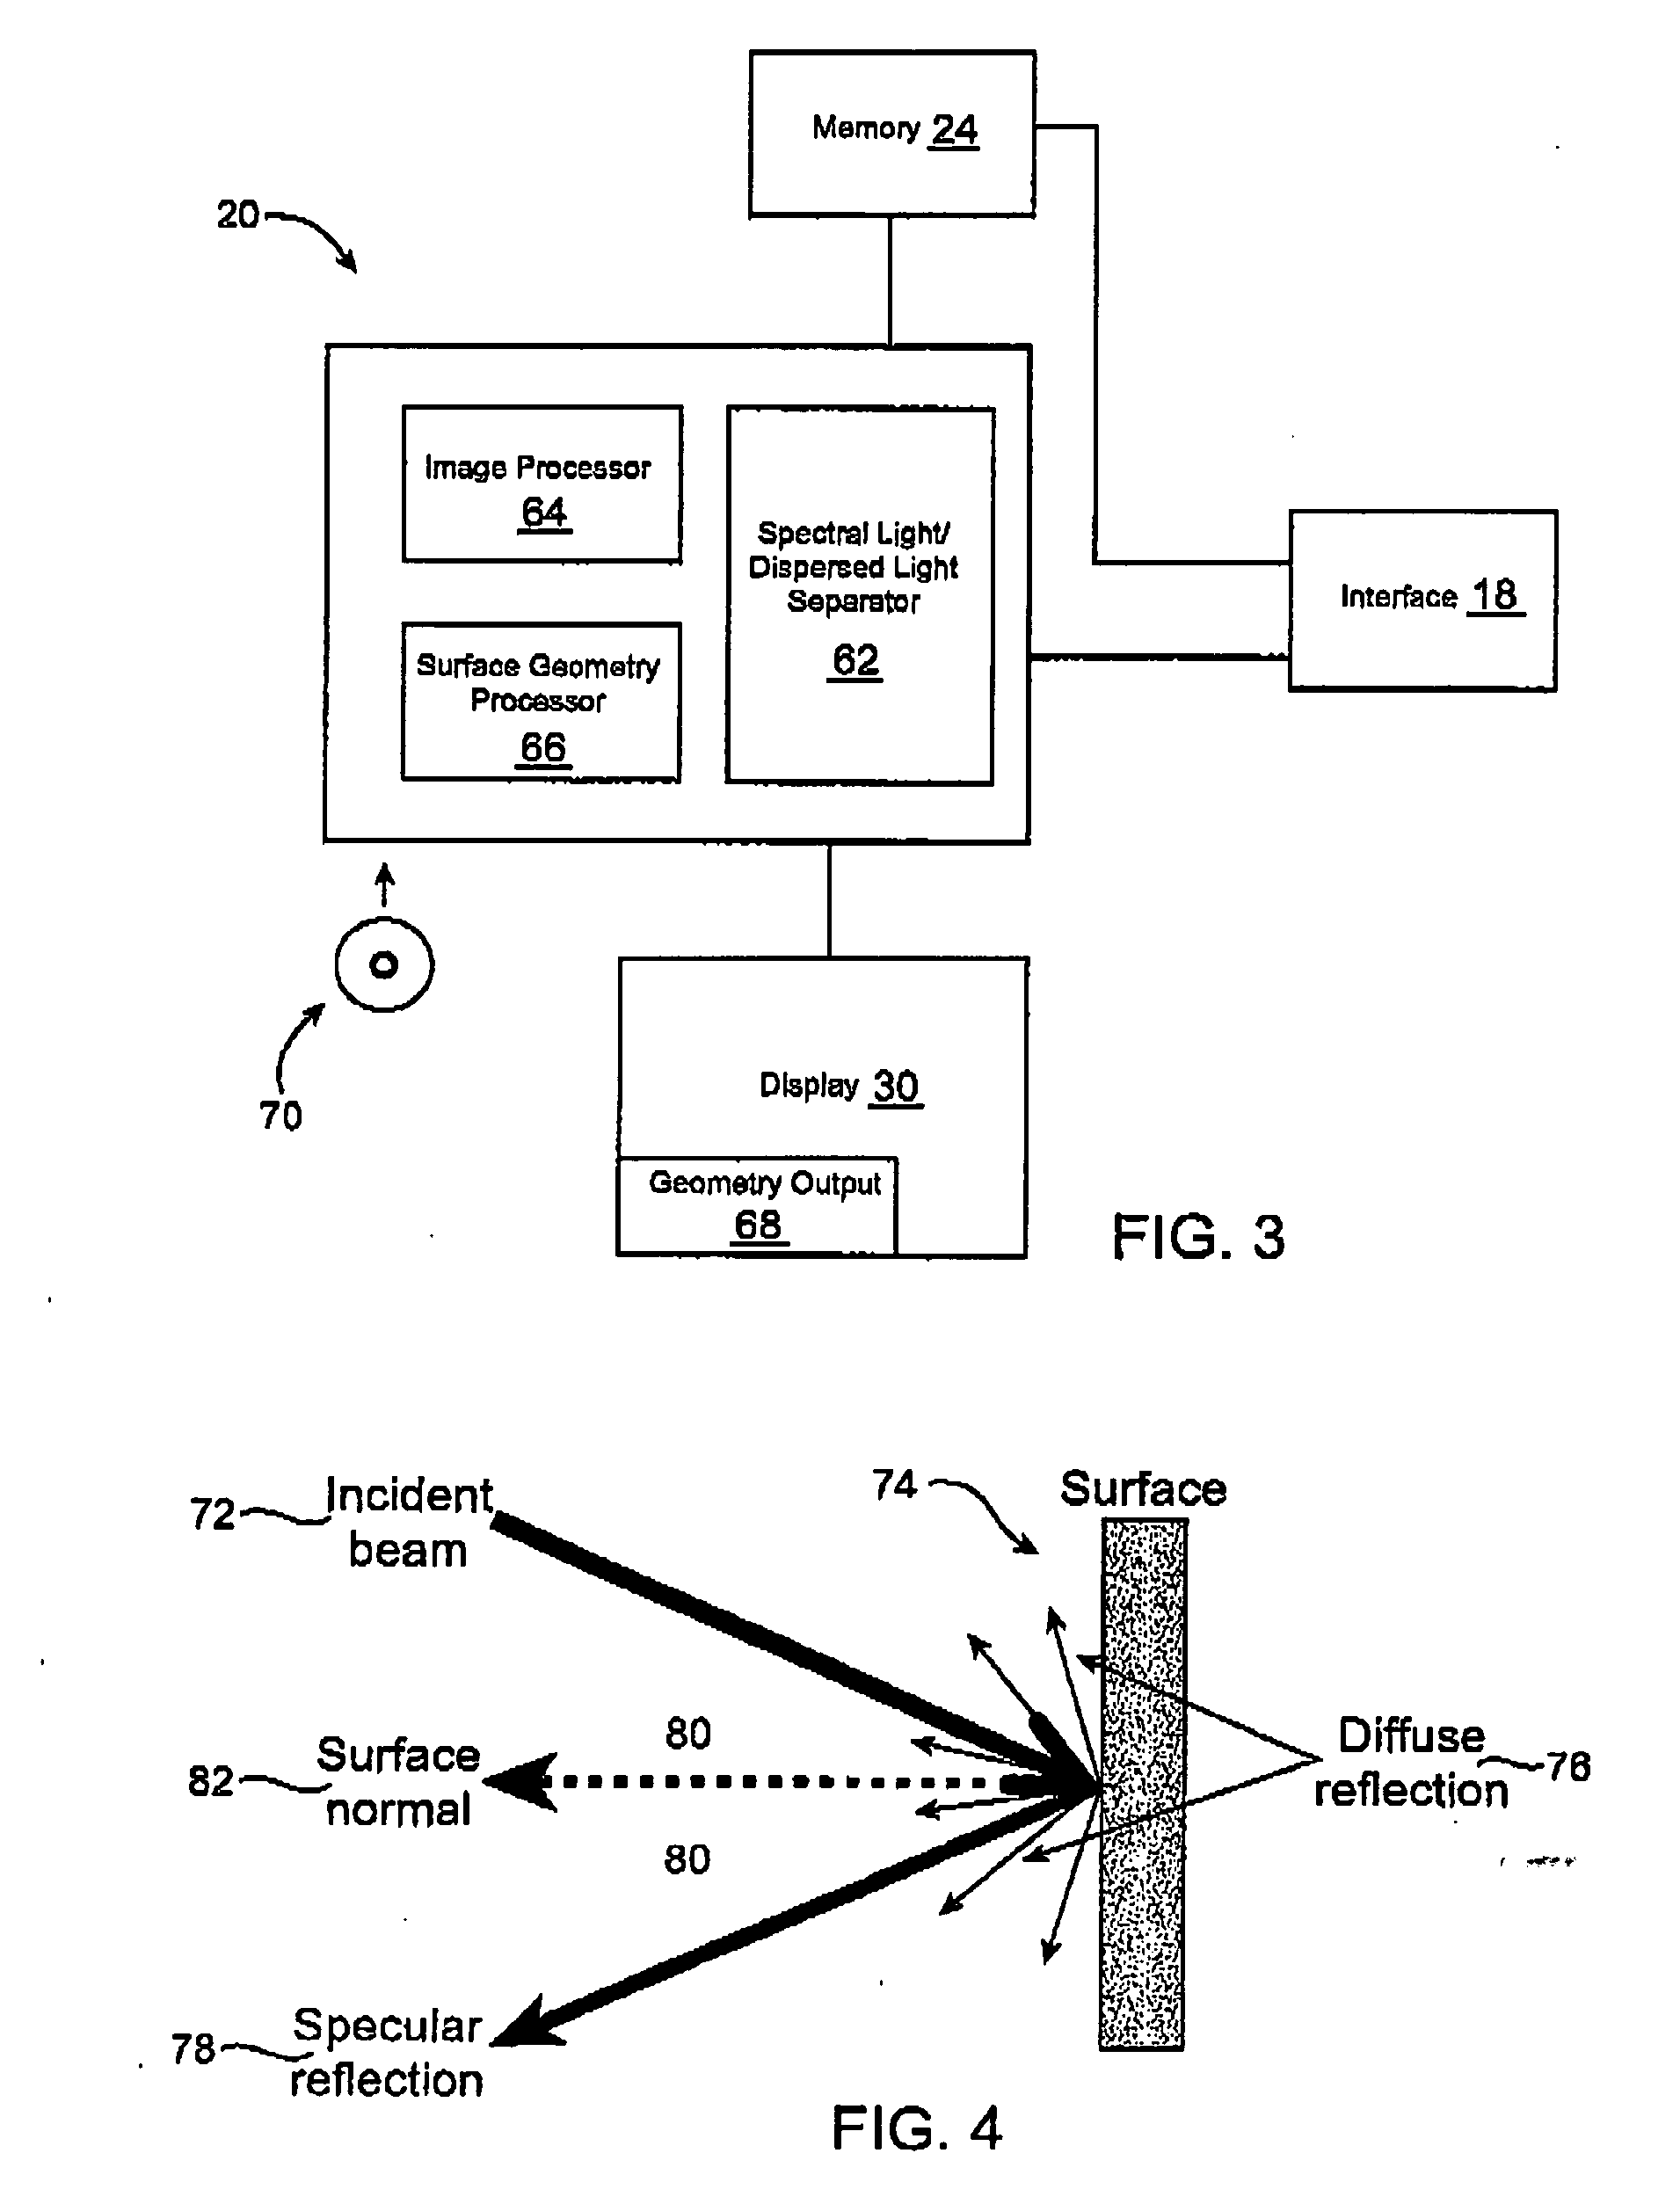 Distance determination in a scanned beam image capture device